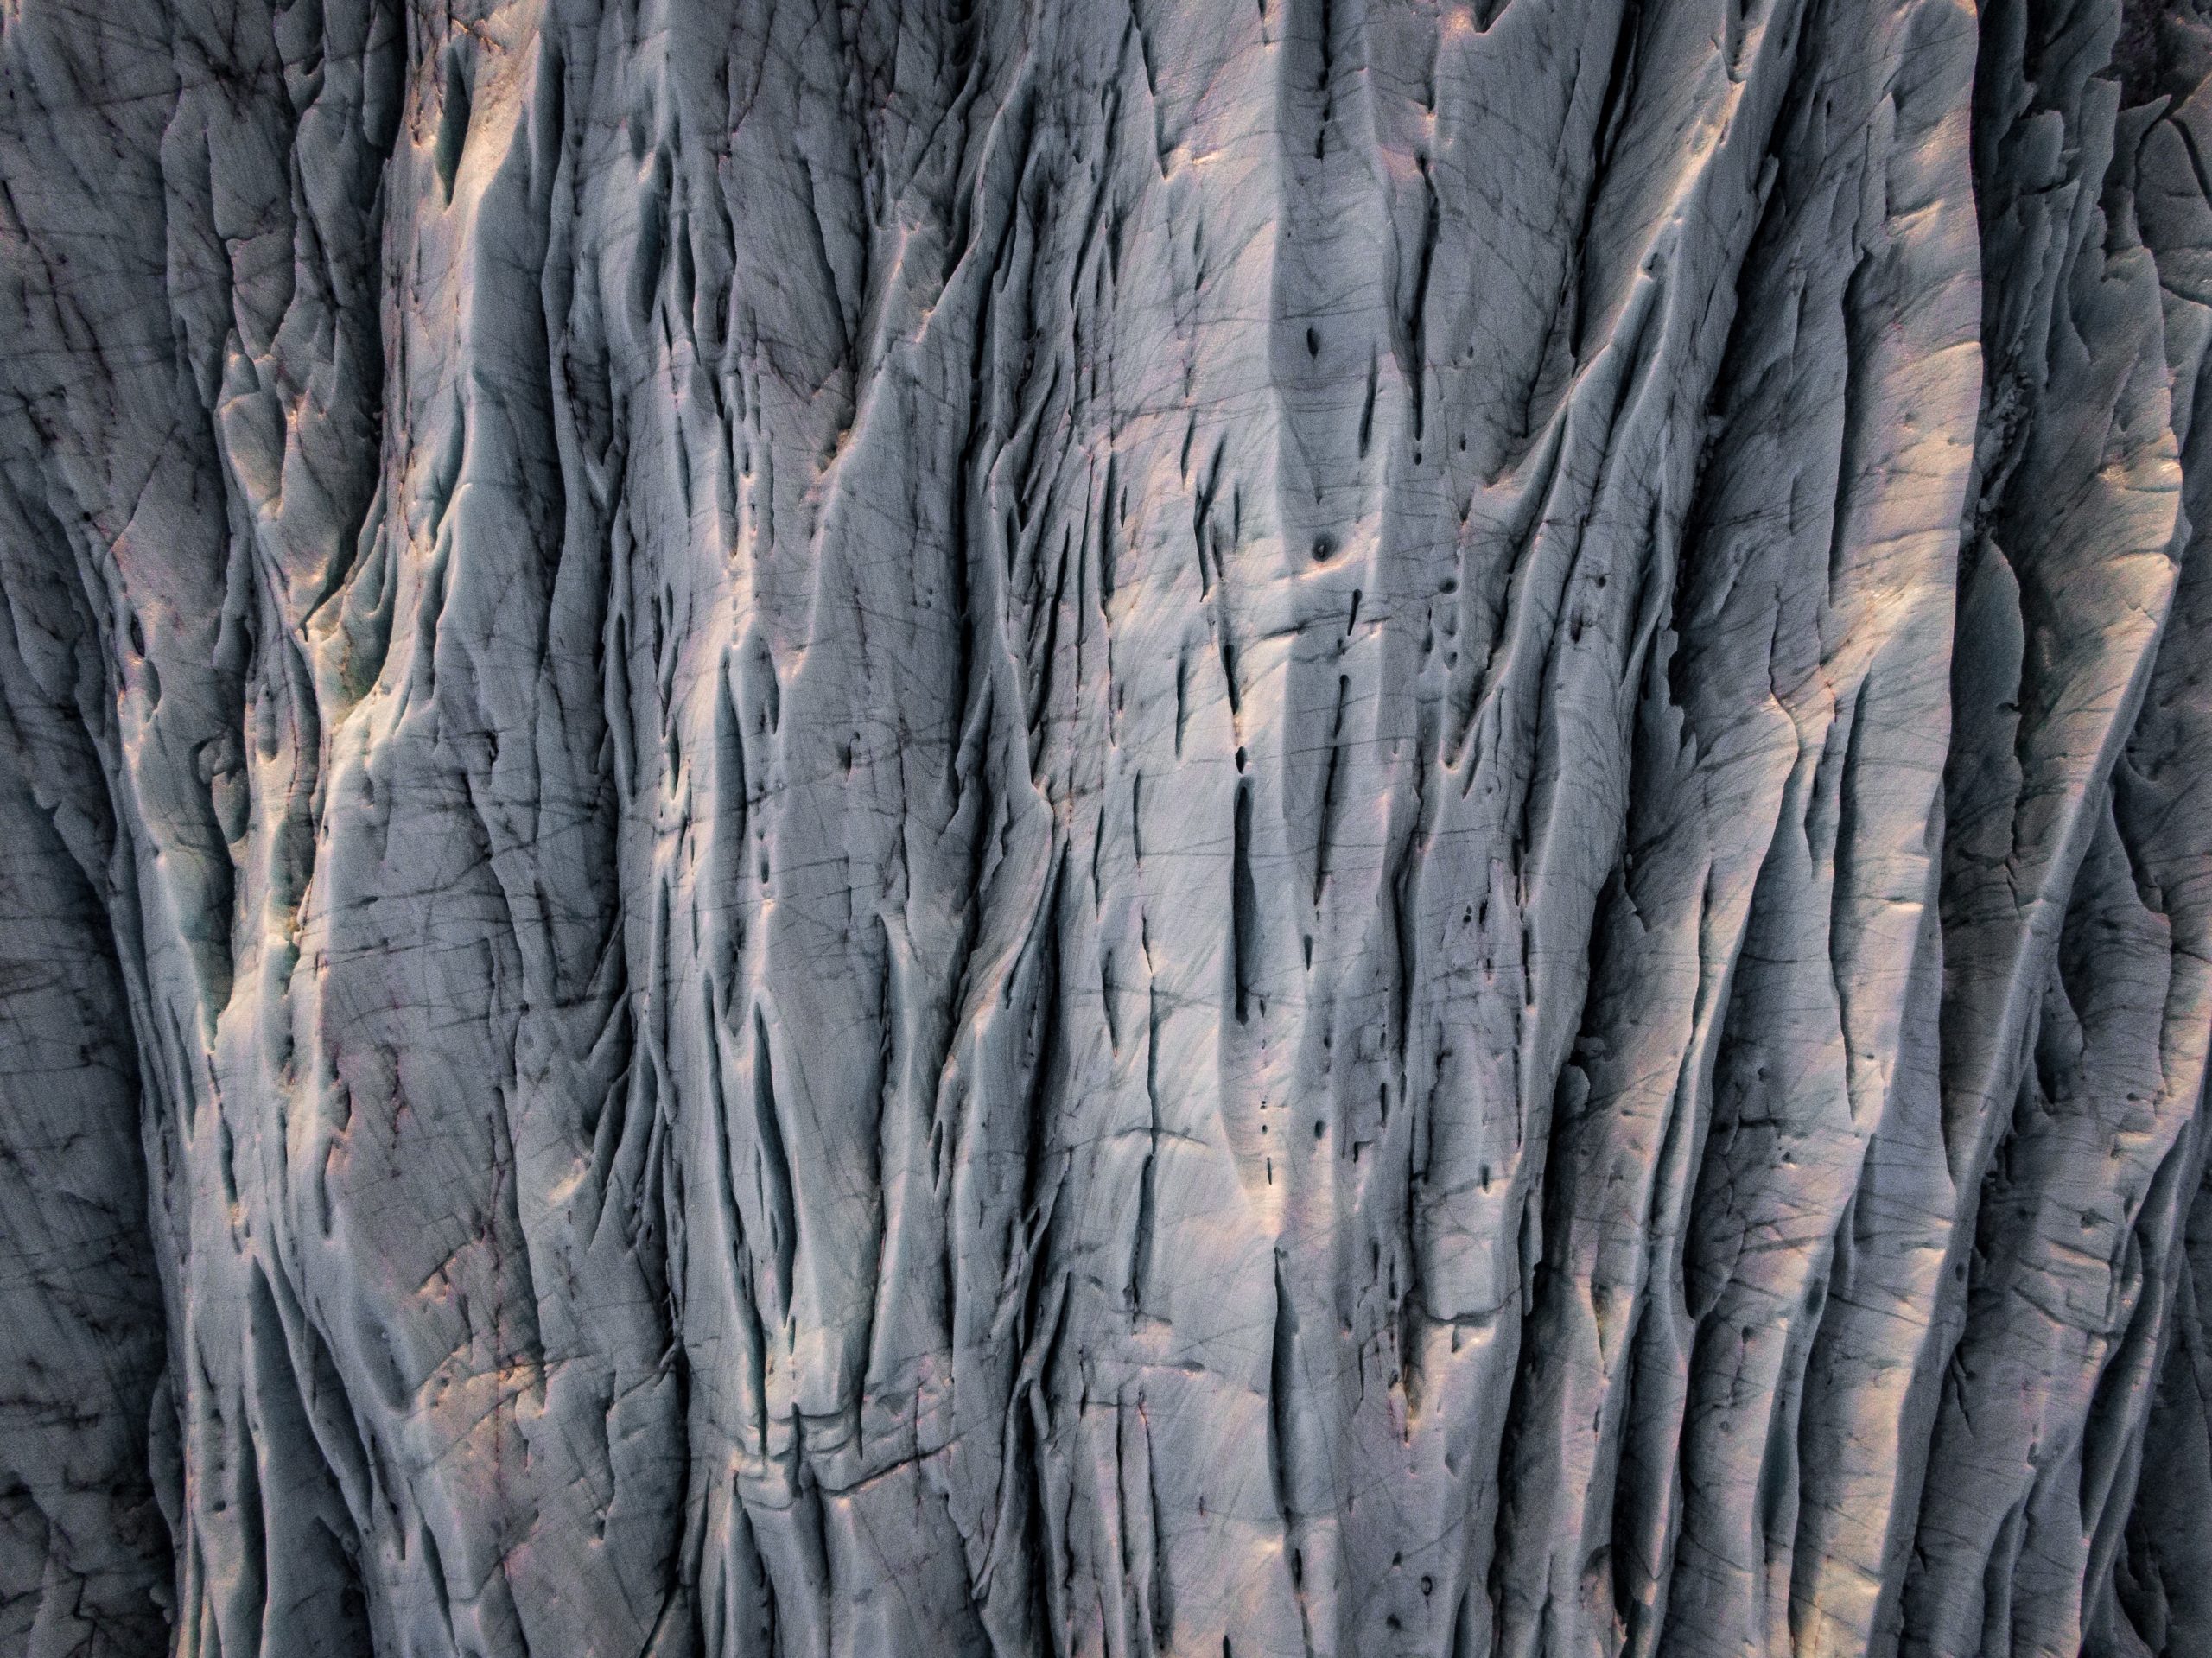 Abstract photo of a rock texture